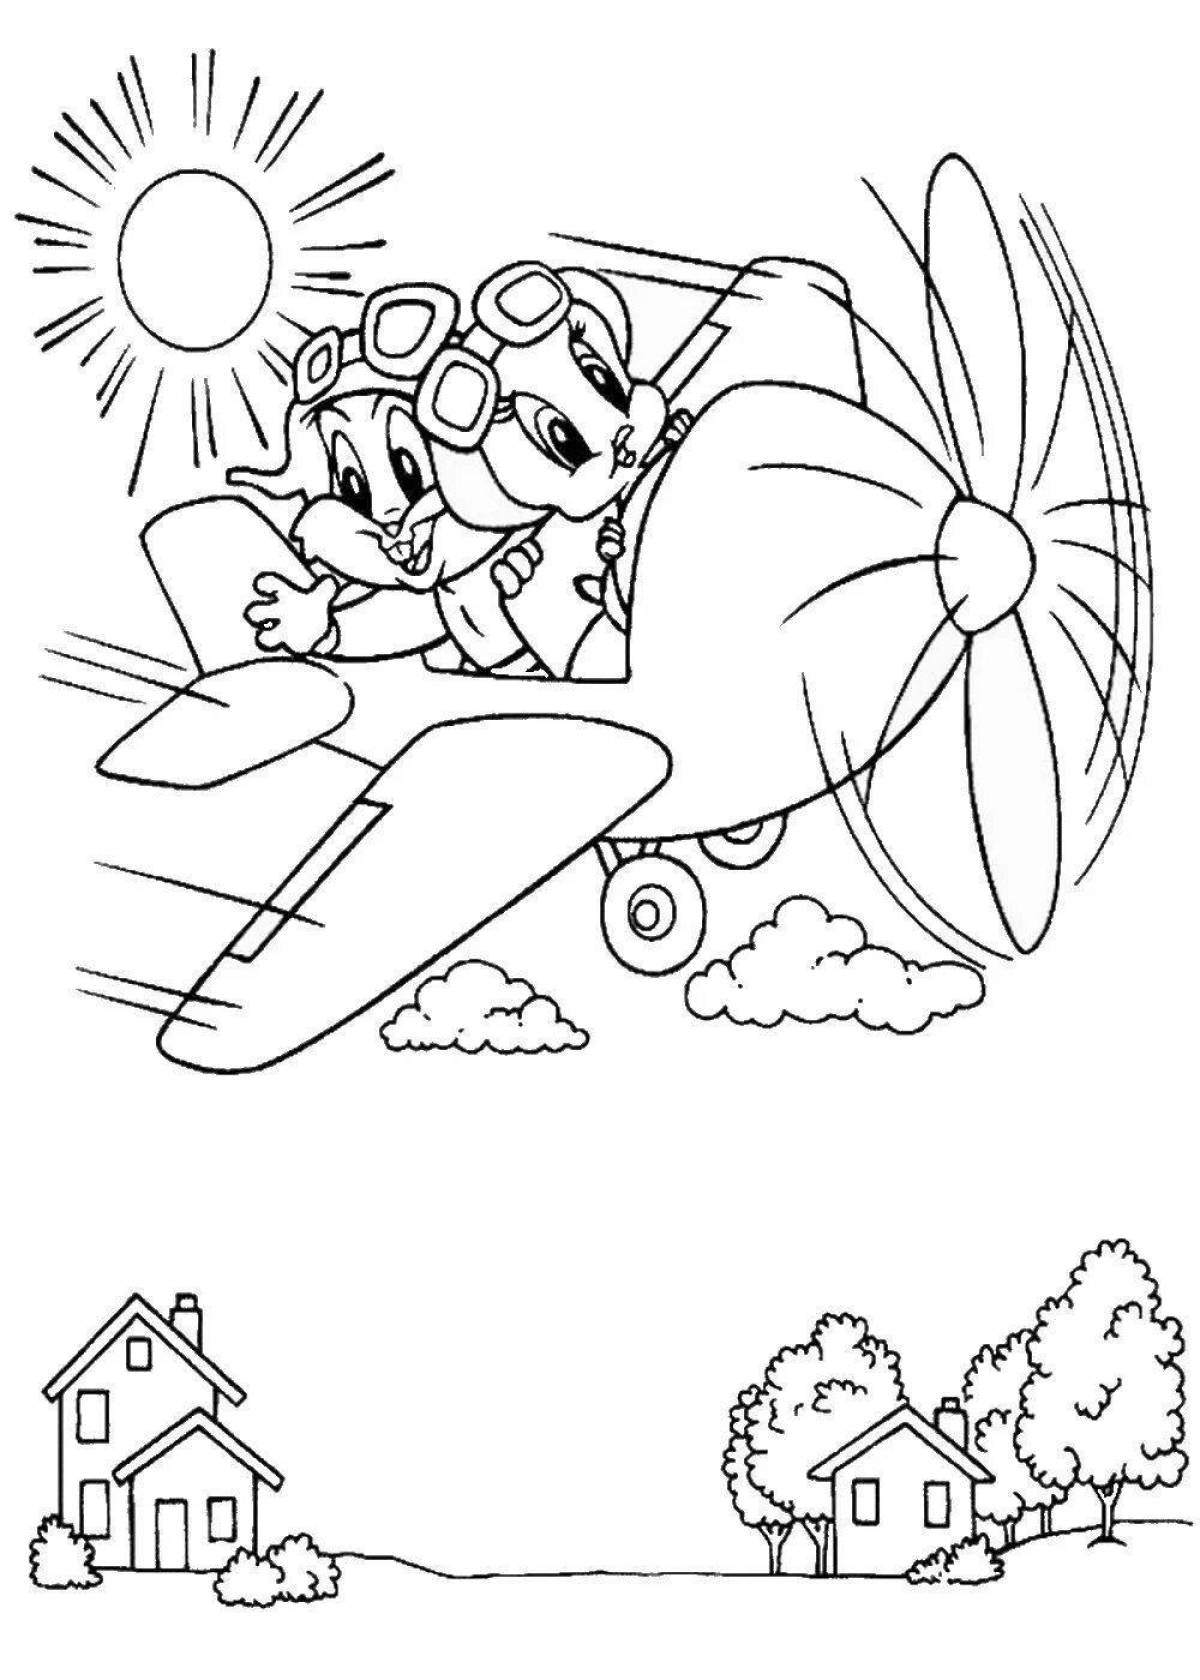 Awesome teenage love coloring page